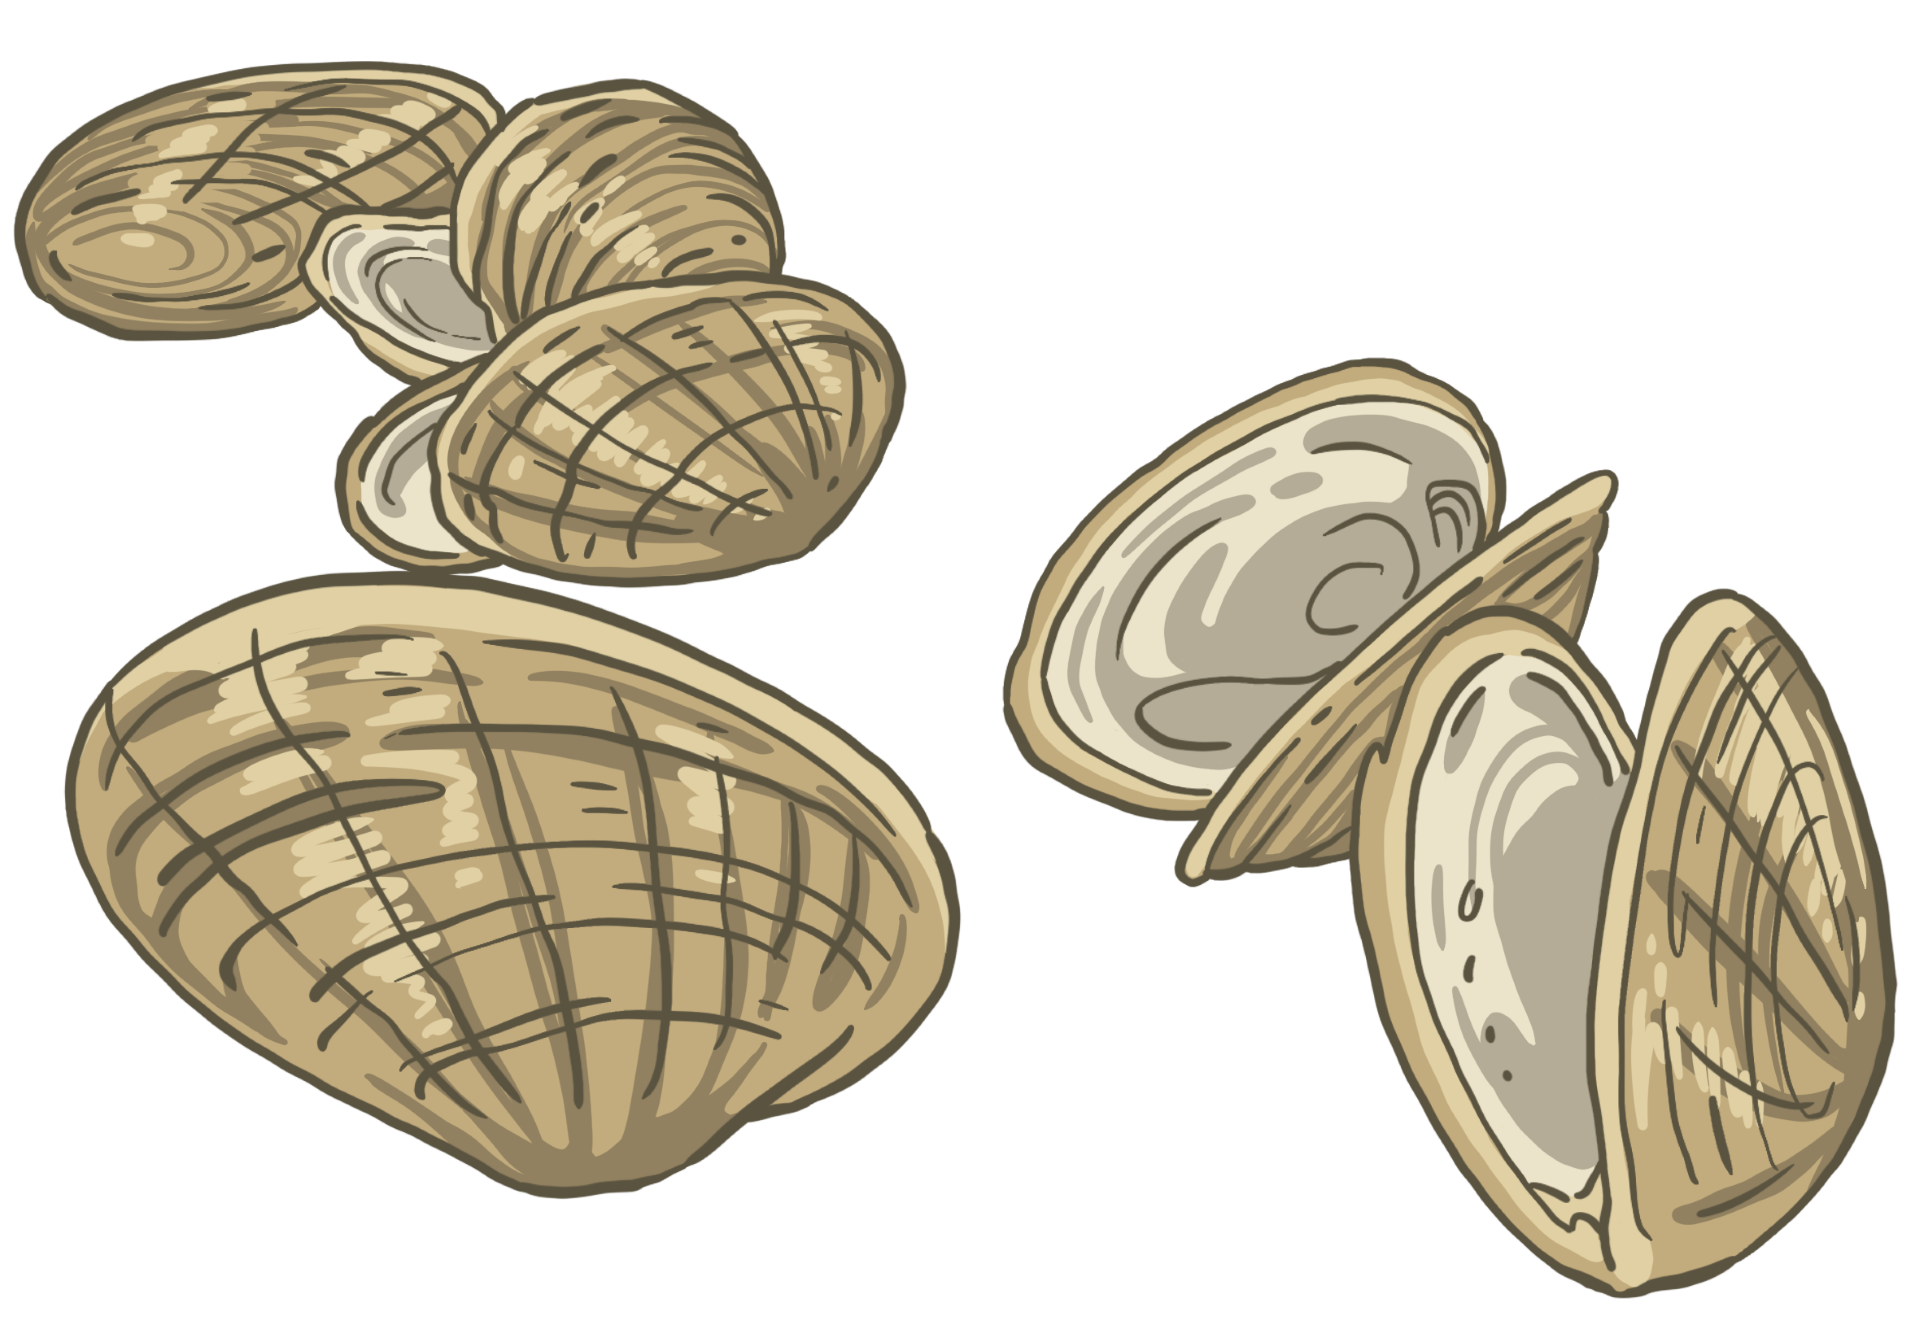 A drawing of several clams with their shells open.